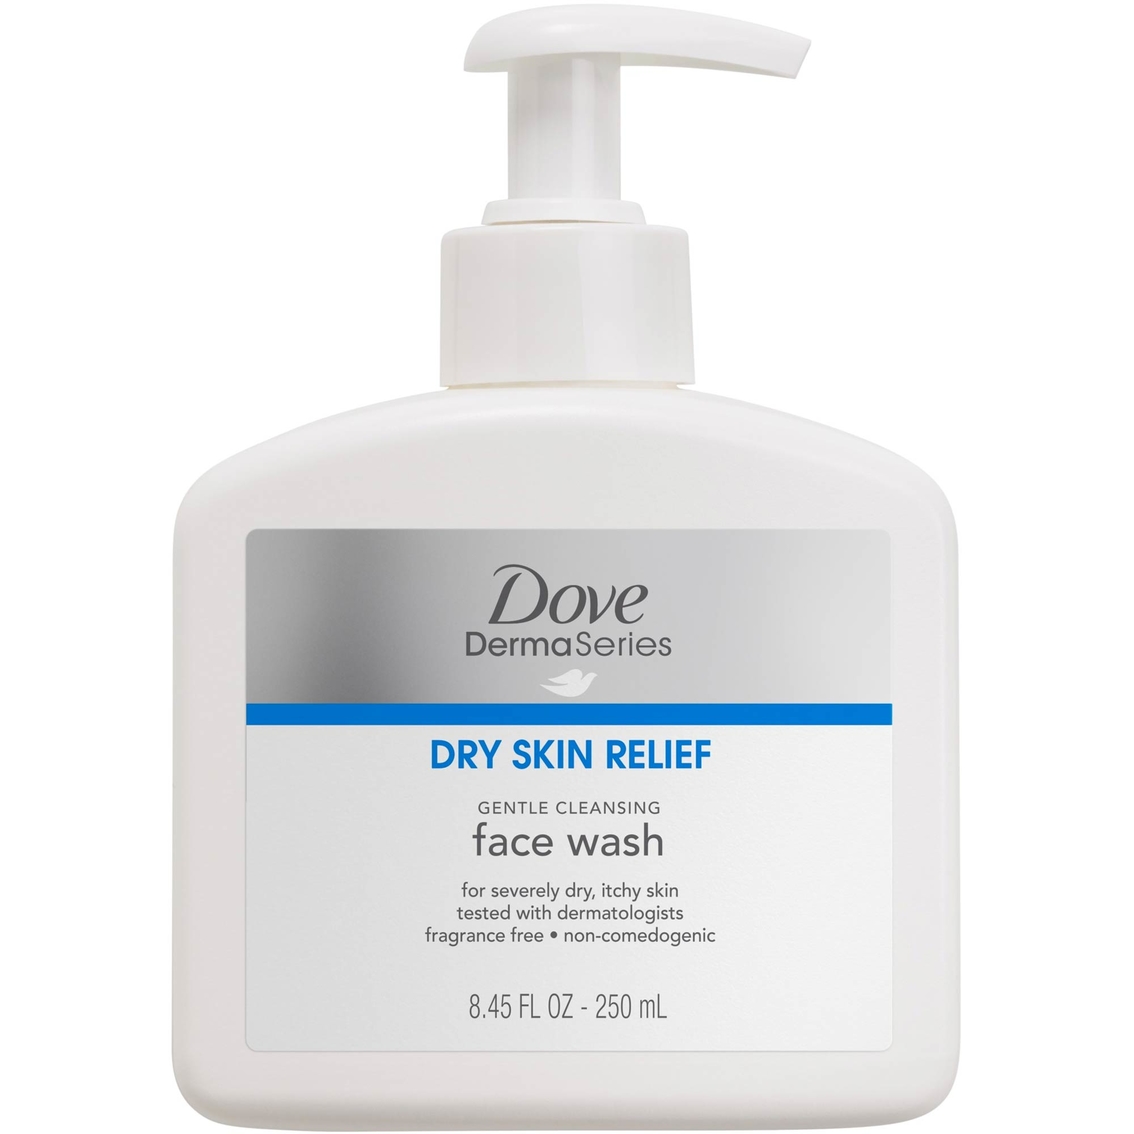 Dove Dermaseries Dry Skin Relief Gentle Cleansing Face Wash